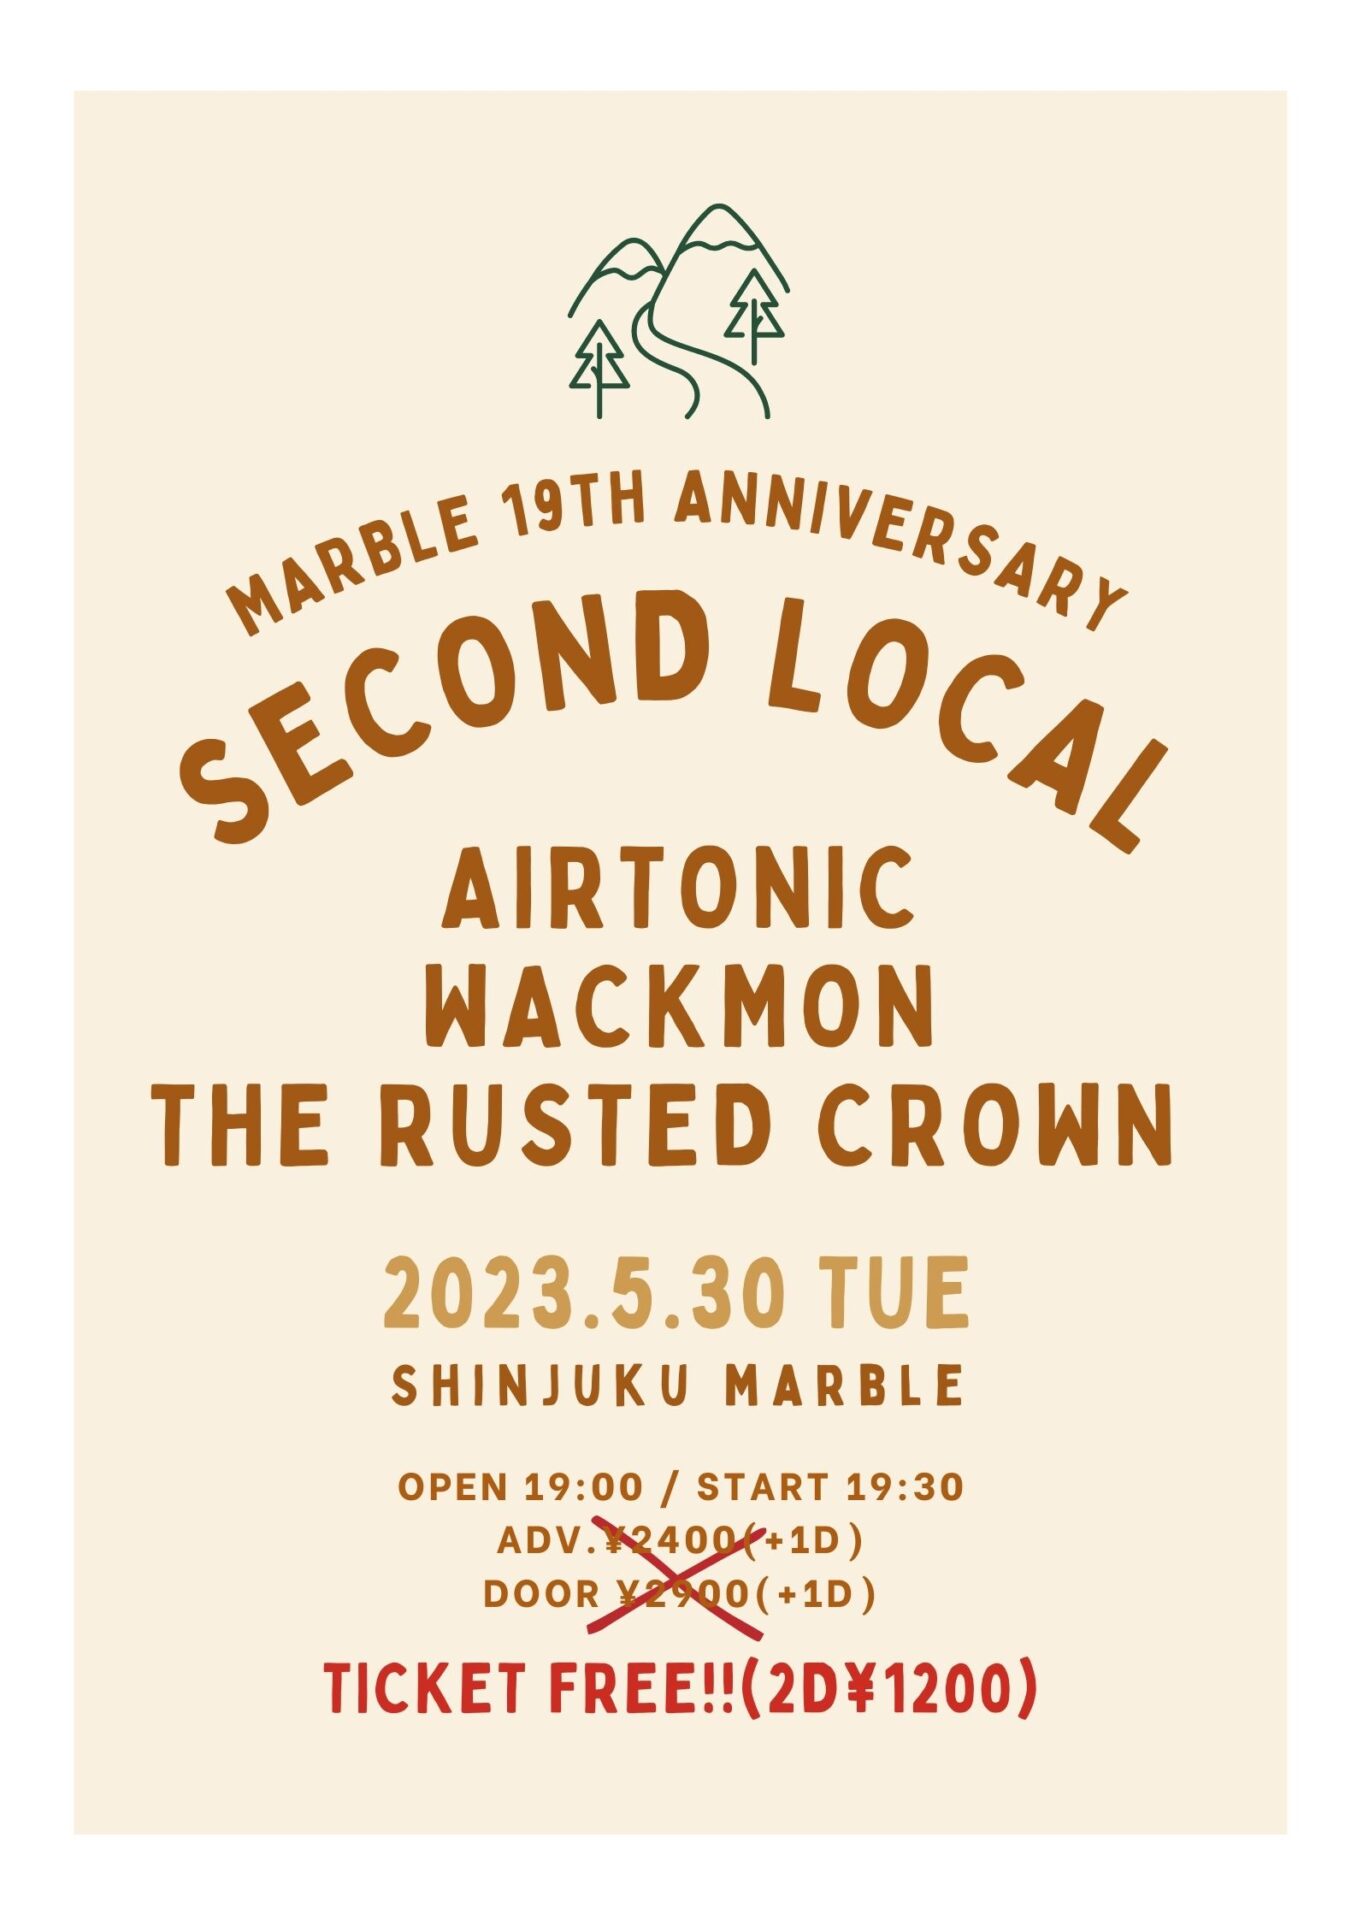 「SECOND LOCAL」-Marble 19th ANNIVERSARY -